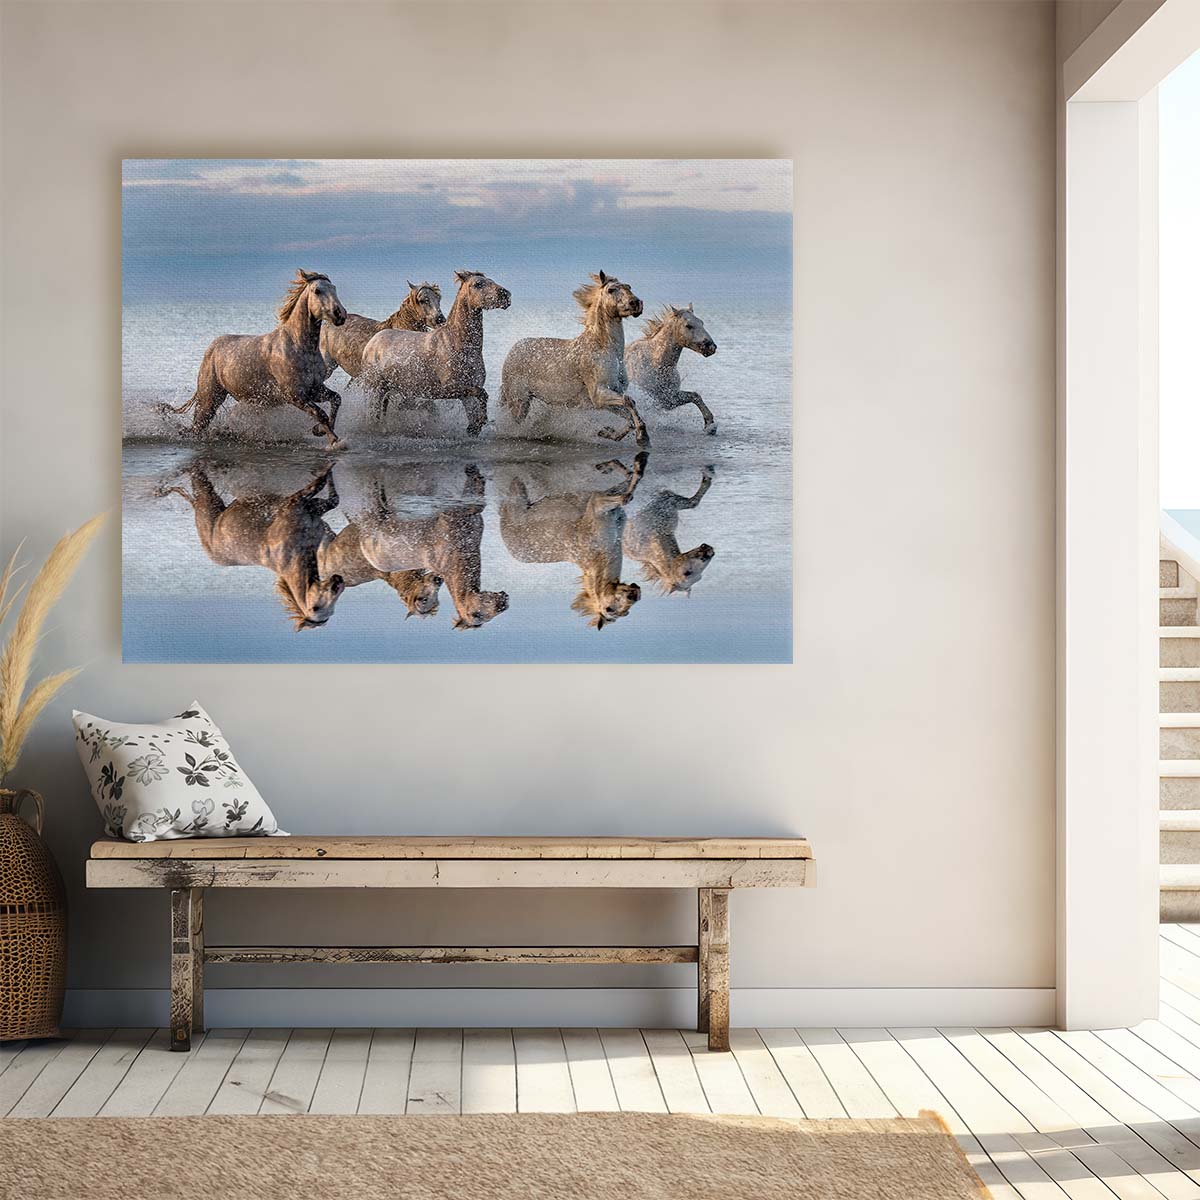 Camargue Wild Horses in Motion Wall Art by Luxuriance Designs. Made in USA.